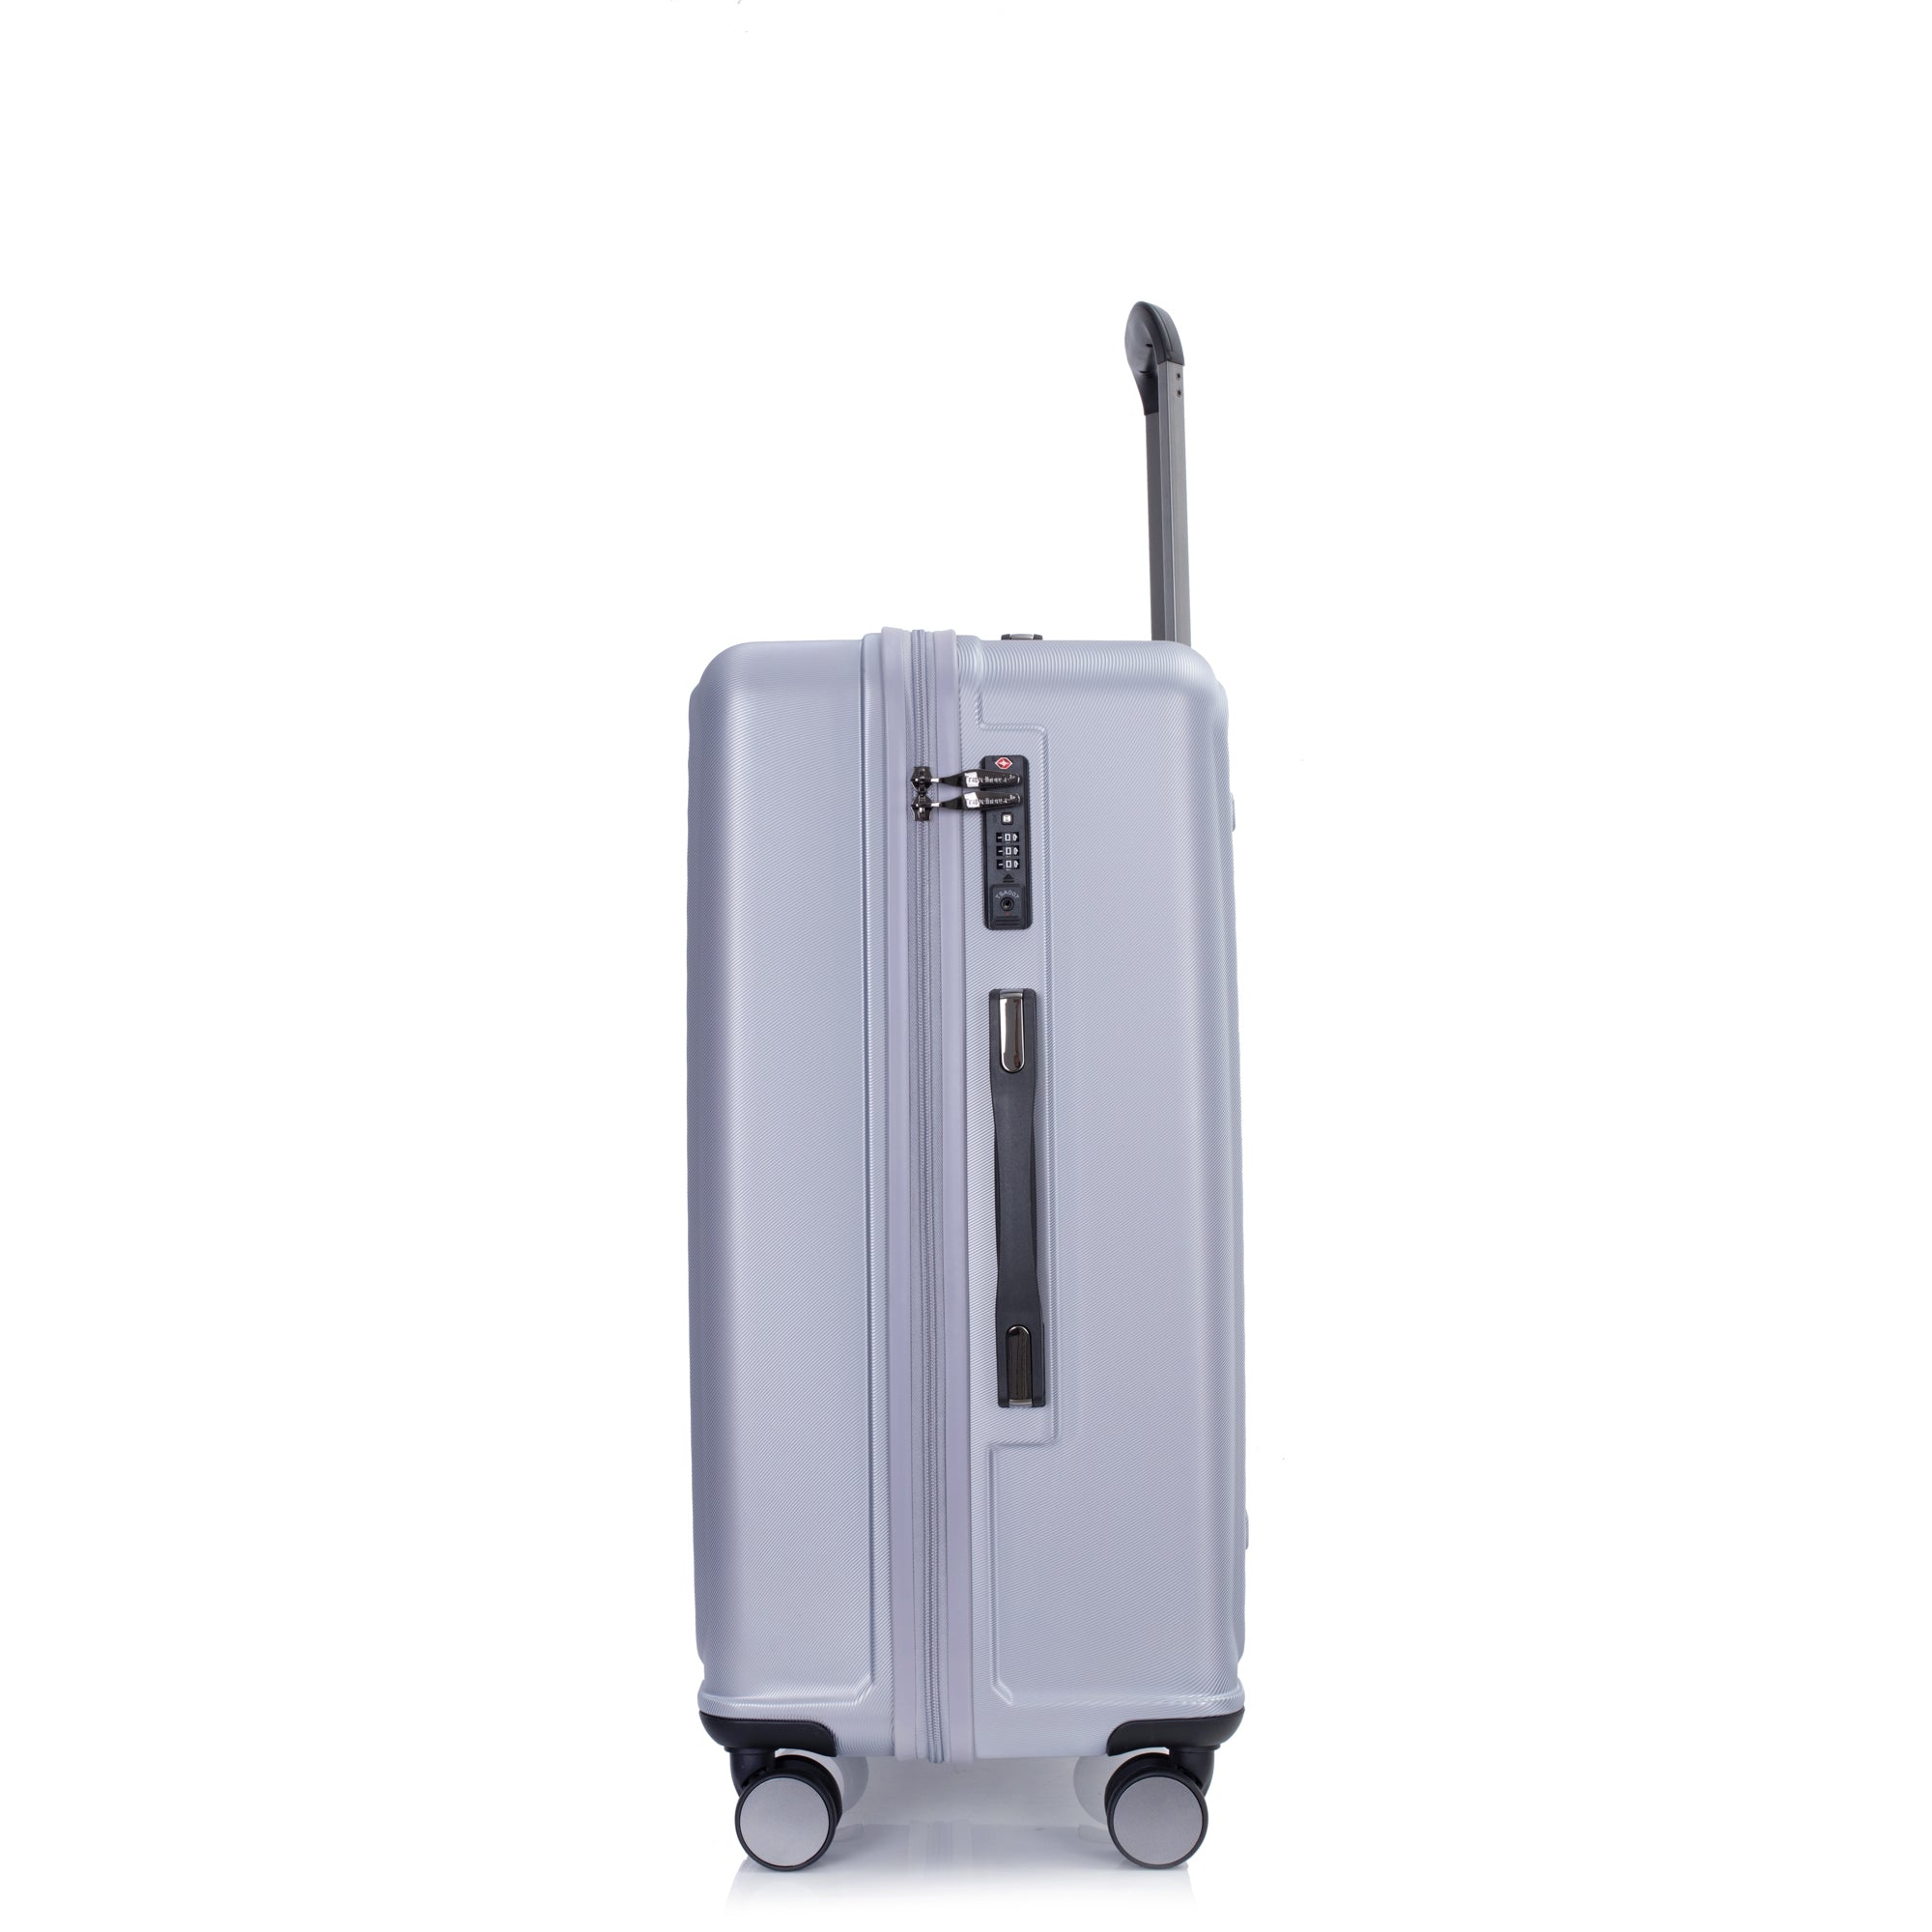 3 Piece Luggage Sets PC ABS Lightweight Suitcase with gray-abs+pc